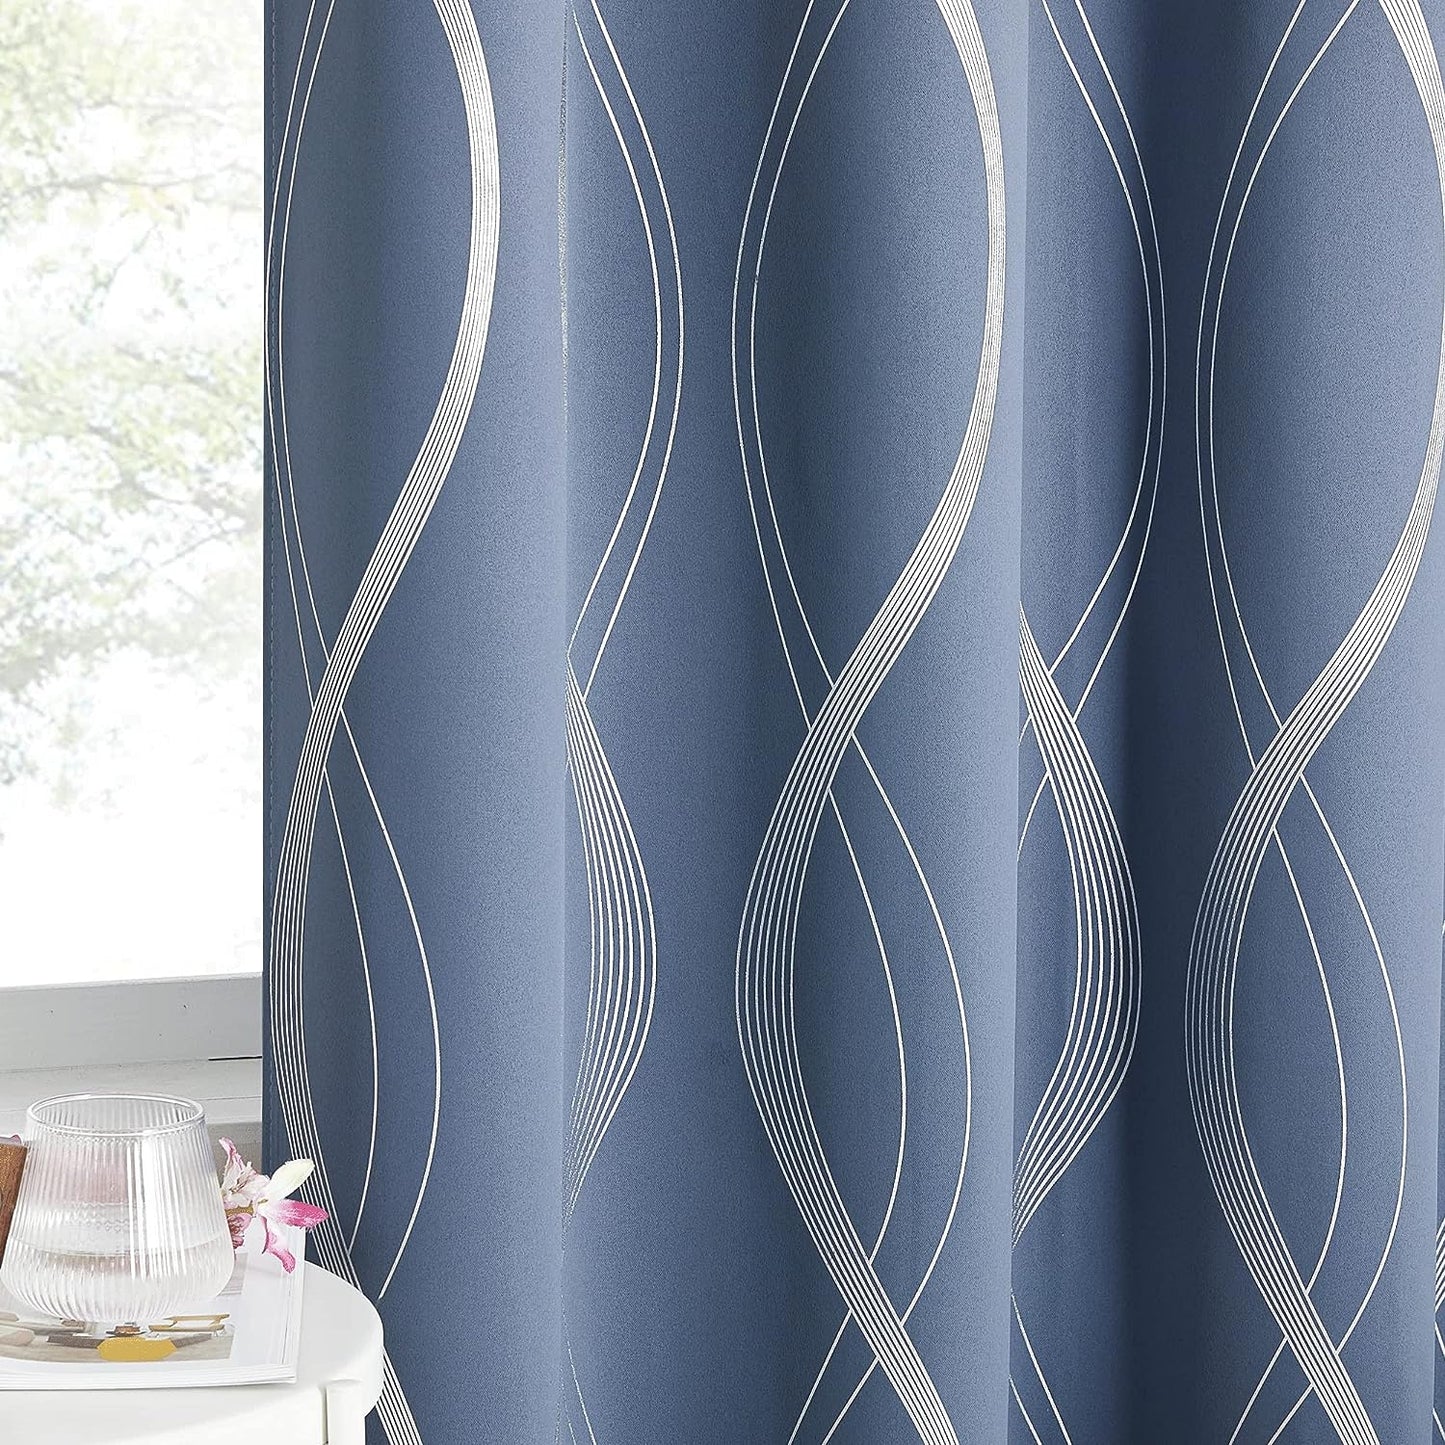 NICETOWN Grey Blackout Curtains 84 Inch Length 2 Panels Set for Bedroom/Living Room, Noise Reducing Thermal Insulated Wave Line Foil Print Drapes for Patio Sliding Glass Door (52 X 84, Gray)  NICETOWN Stone Blue 42"W X 63"L 